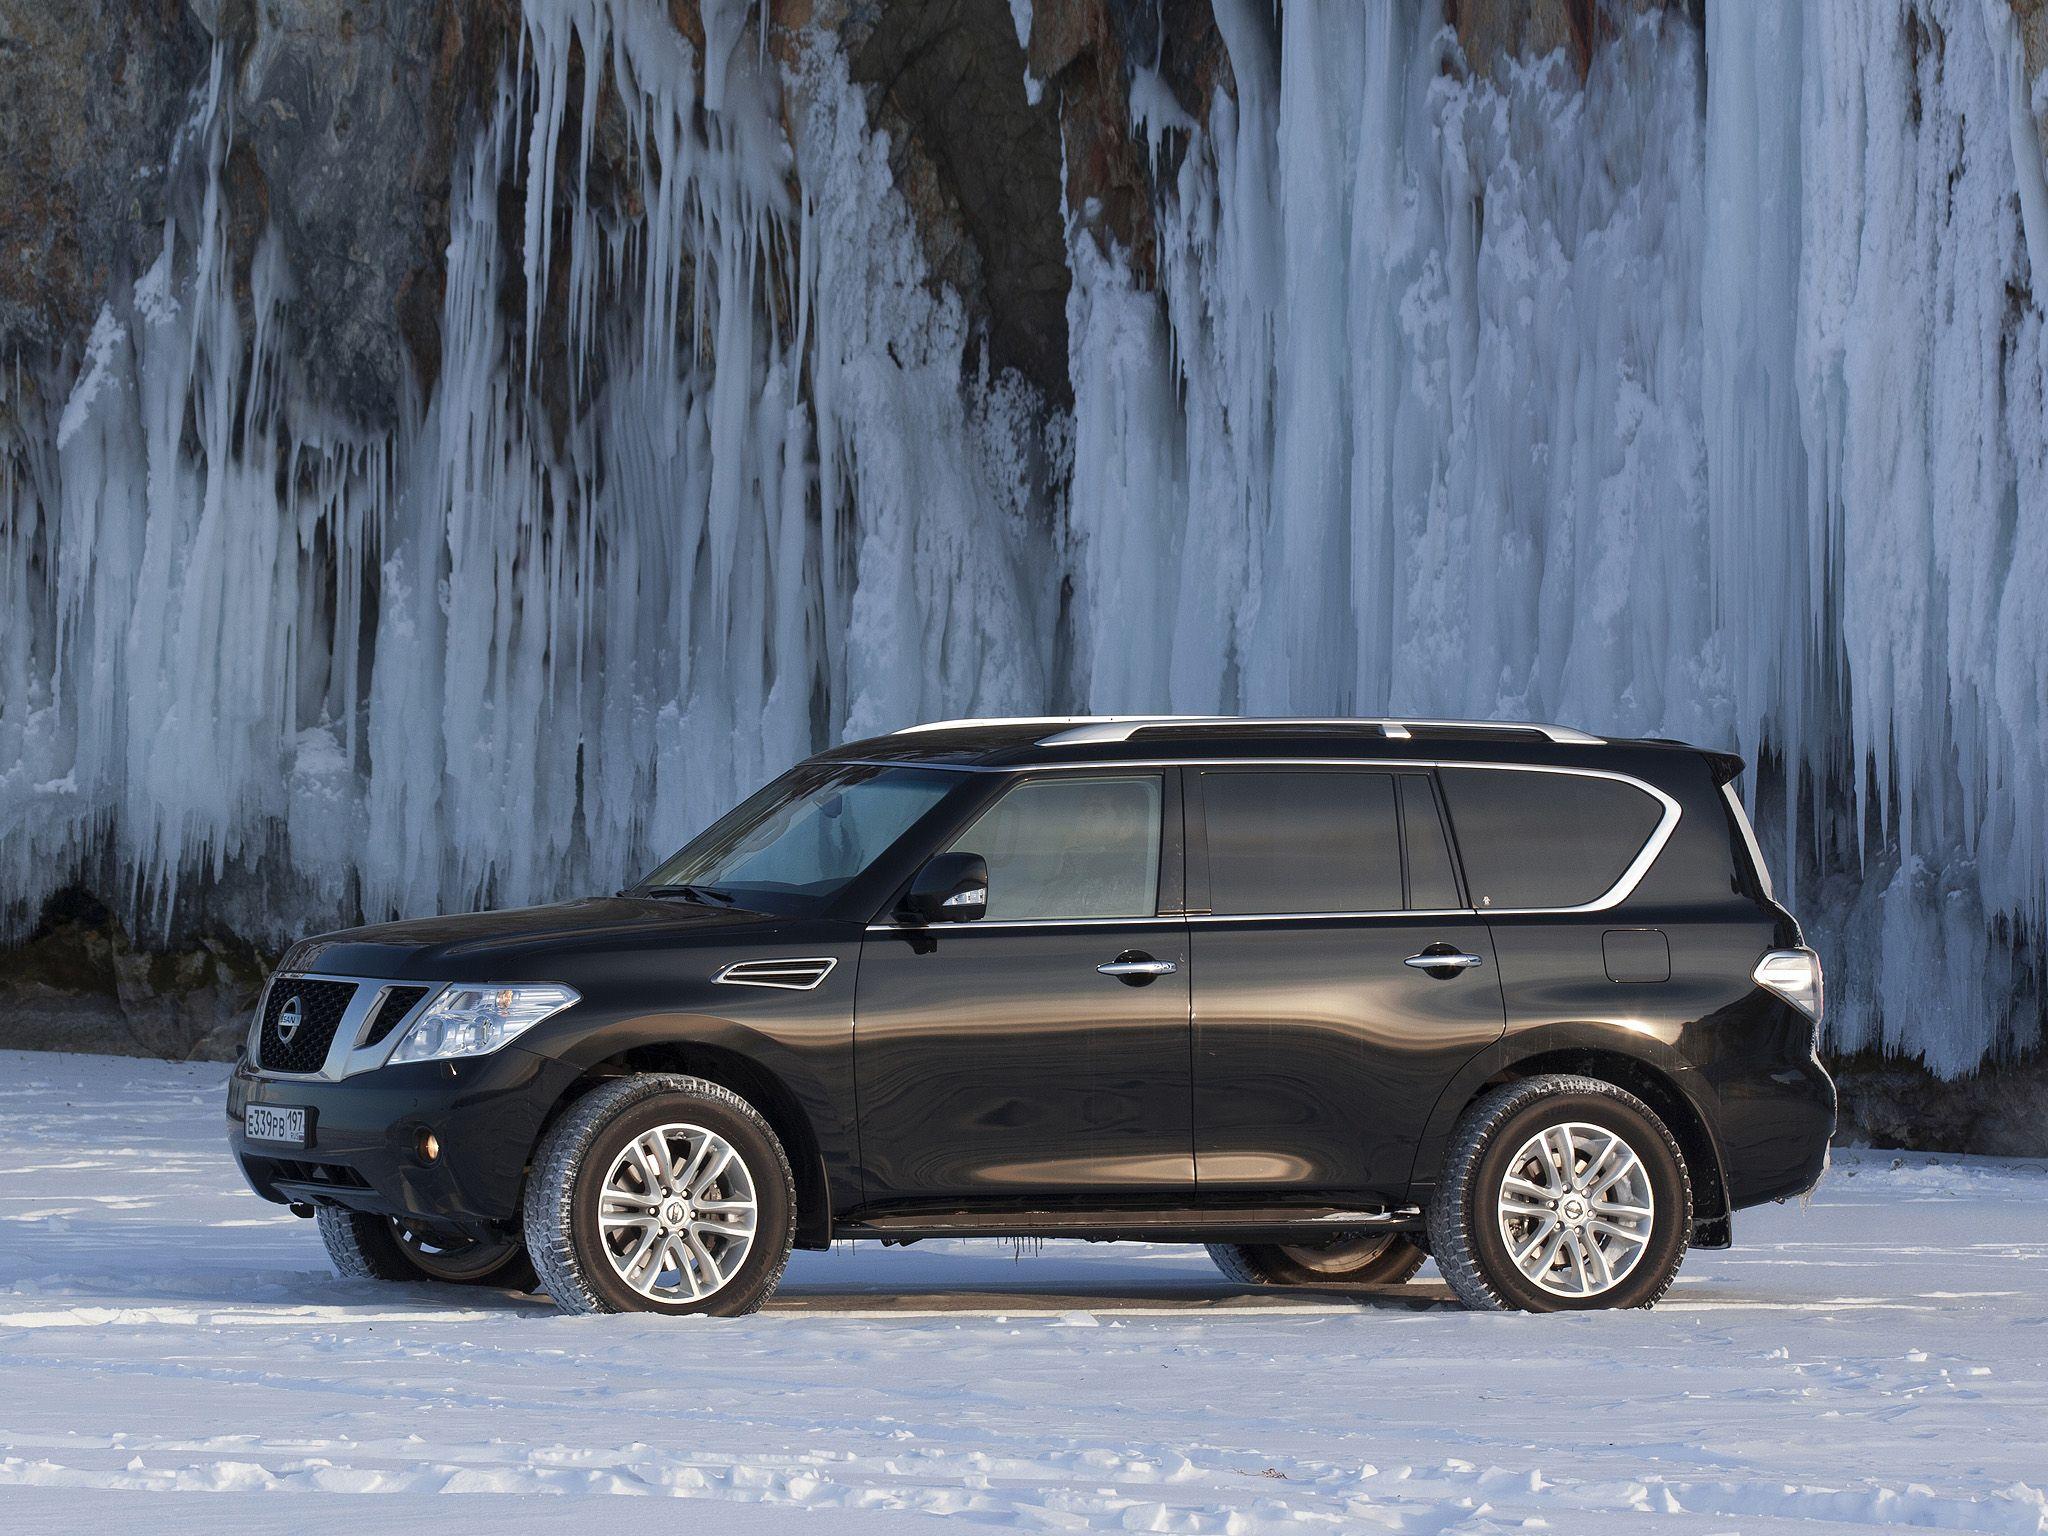 Nissan Patrol picture # 95611. Nissan photo gallery